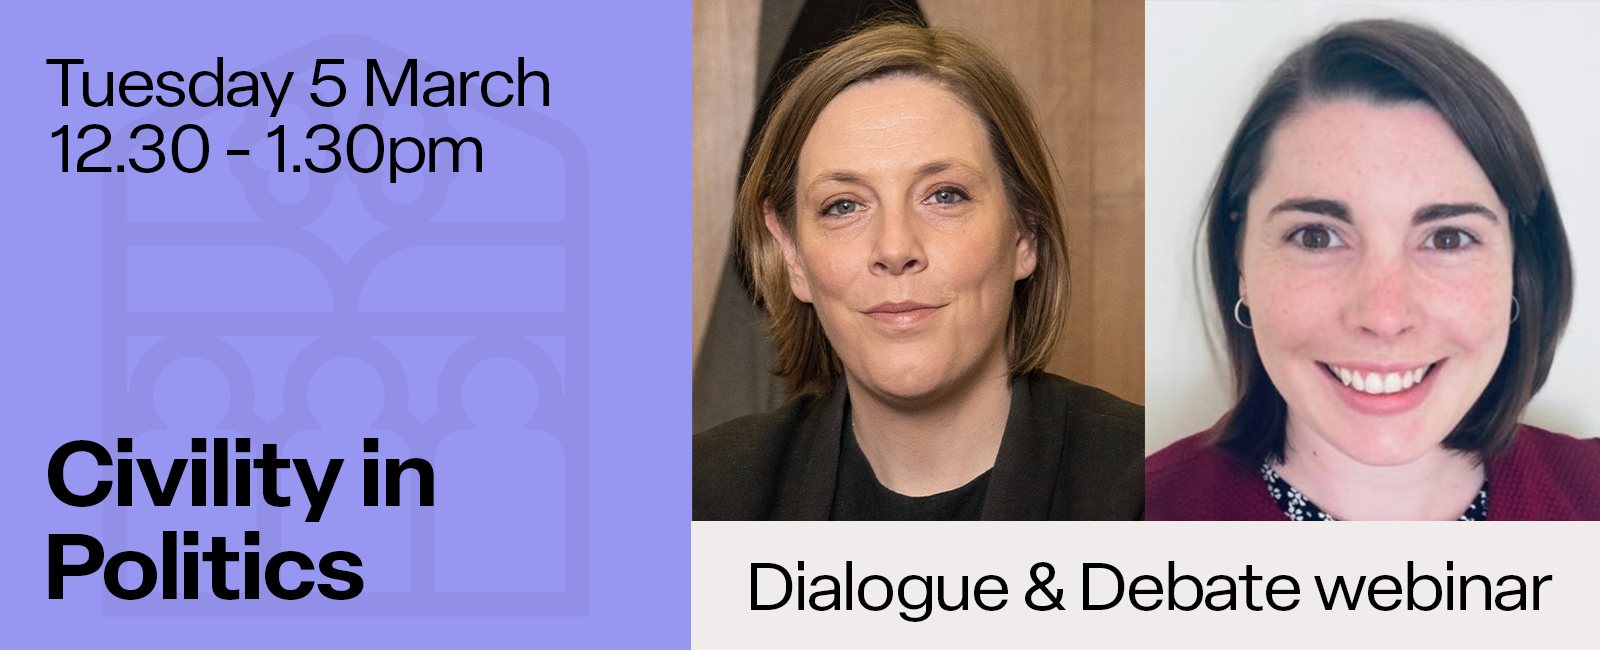 The faces of Jess Philips MP and Hannah Phillips, who will be speaking at this event. TEXT: Tuesday 5 March, 12.30 - 1.30pm, Civility in Politics, Dialogue & Debate webinar